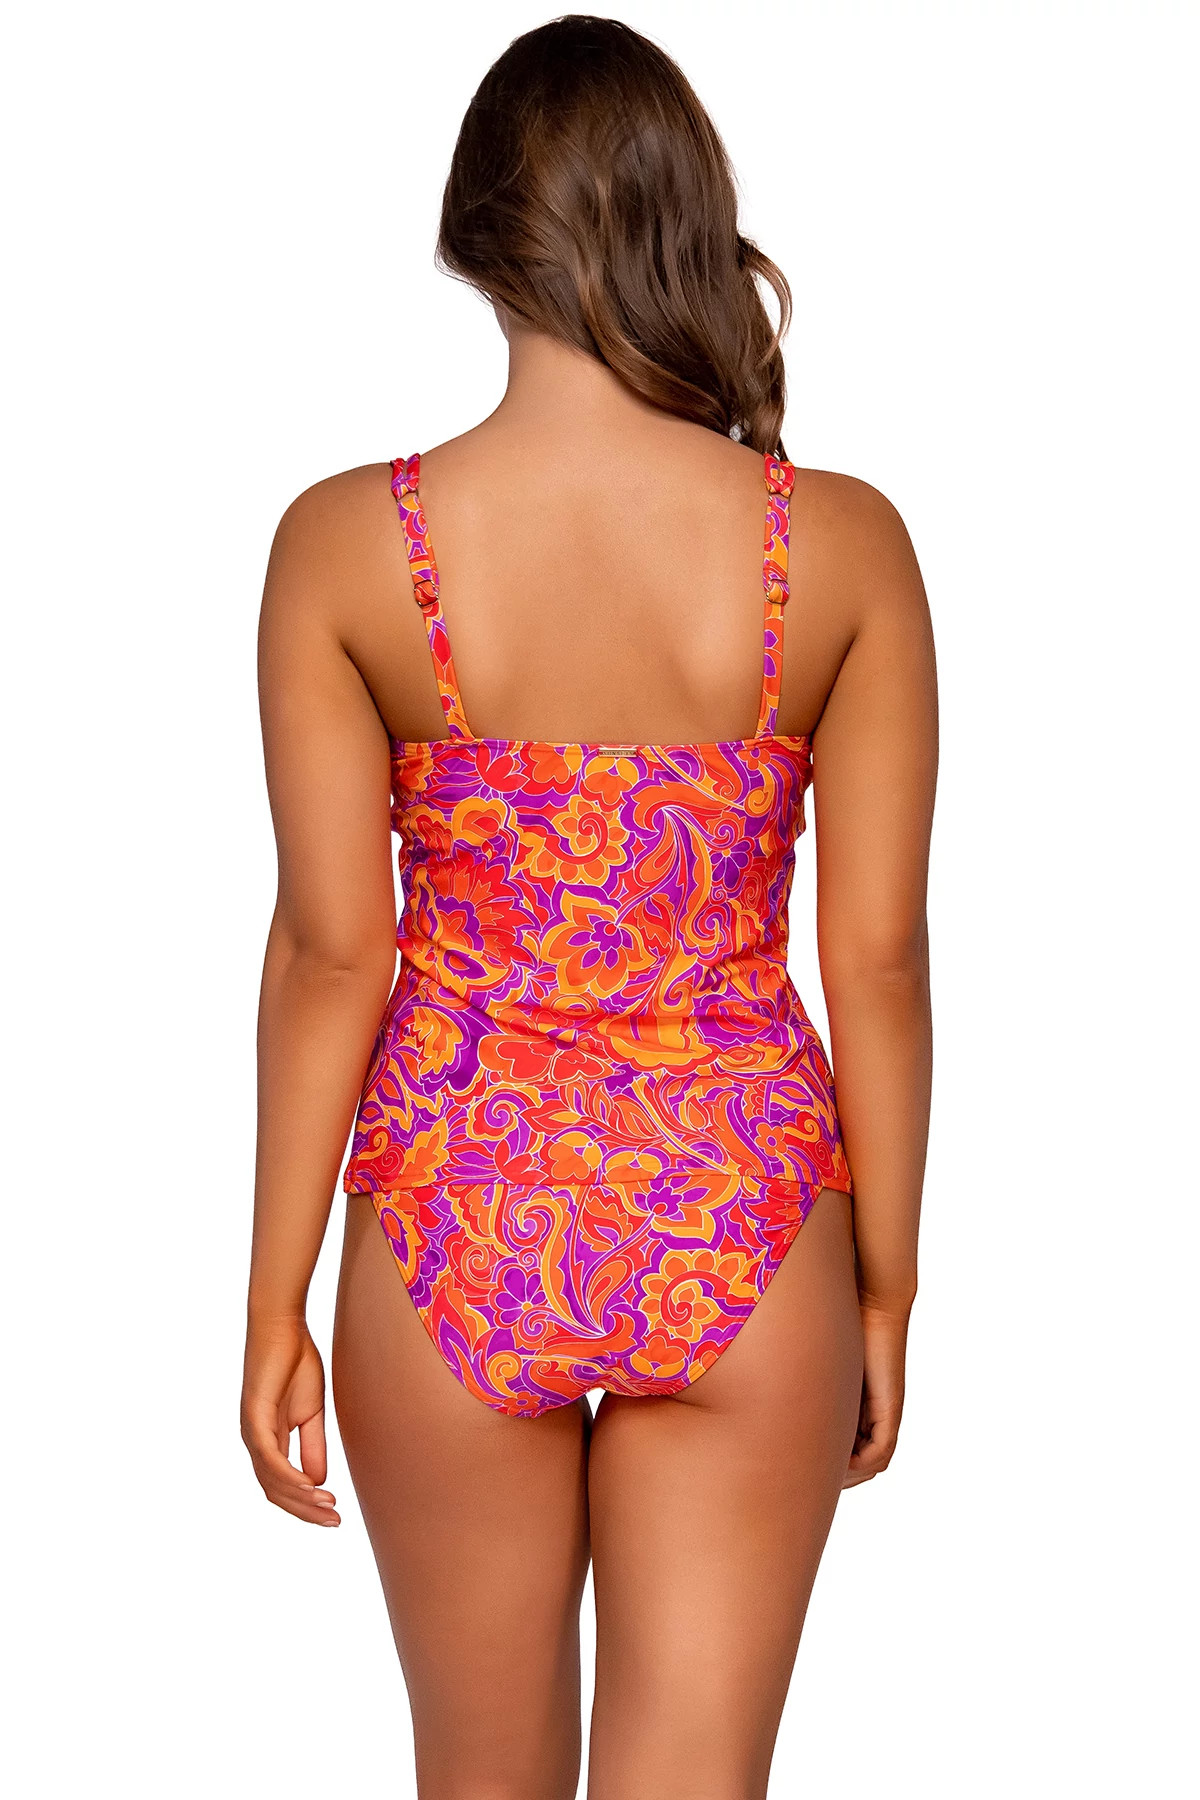 PELE Taylor Molded Underwire Bra Tankini Top (E-H Cup) image number 2